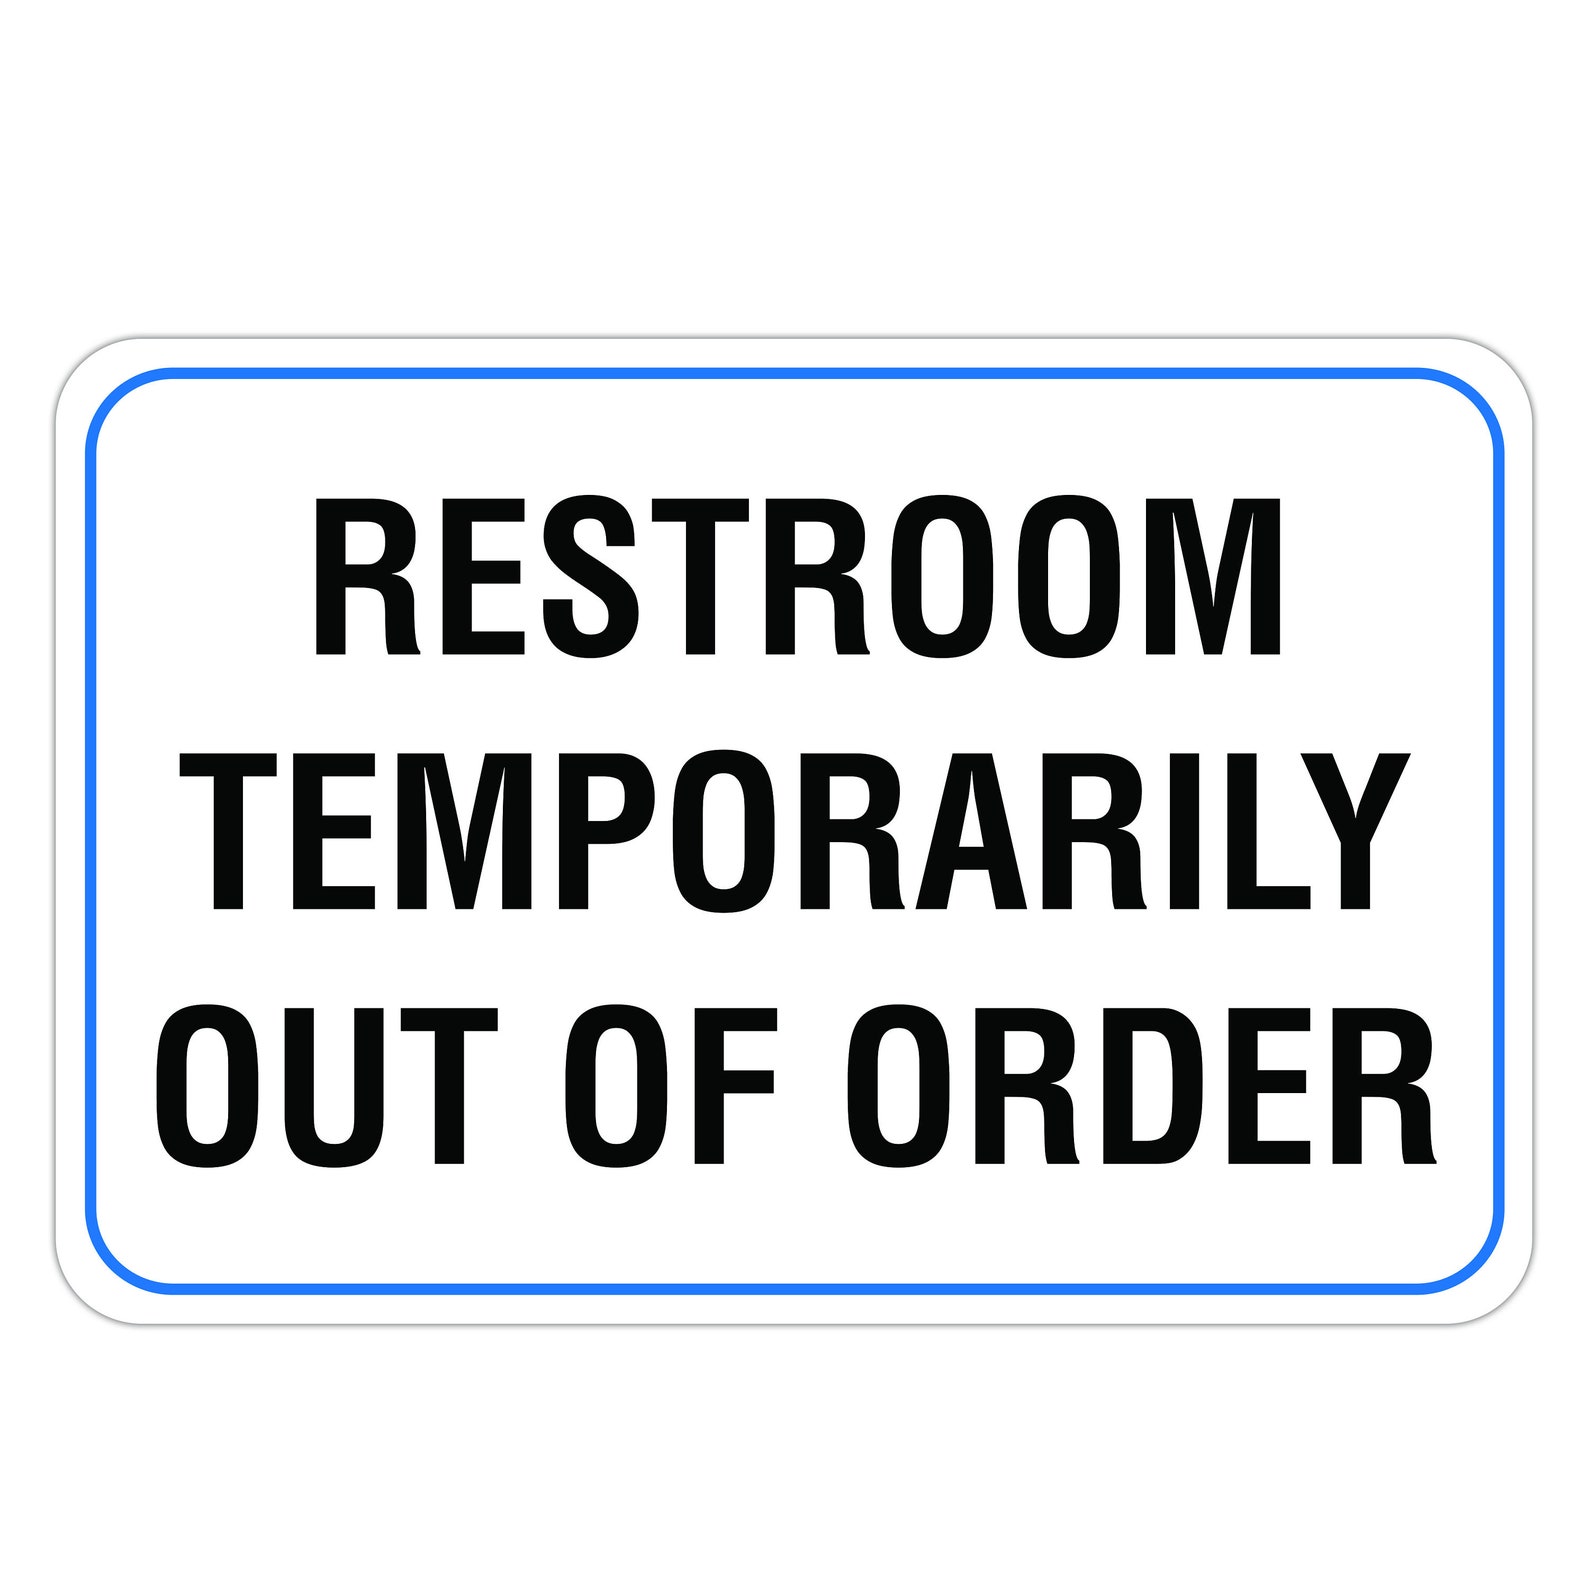 Restroom Temporarily Out of Order Aluminum Sign Bathroom - Etsy